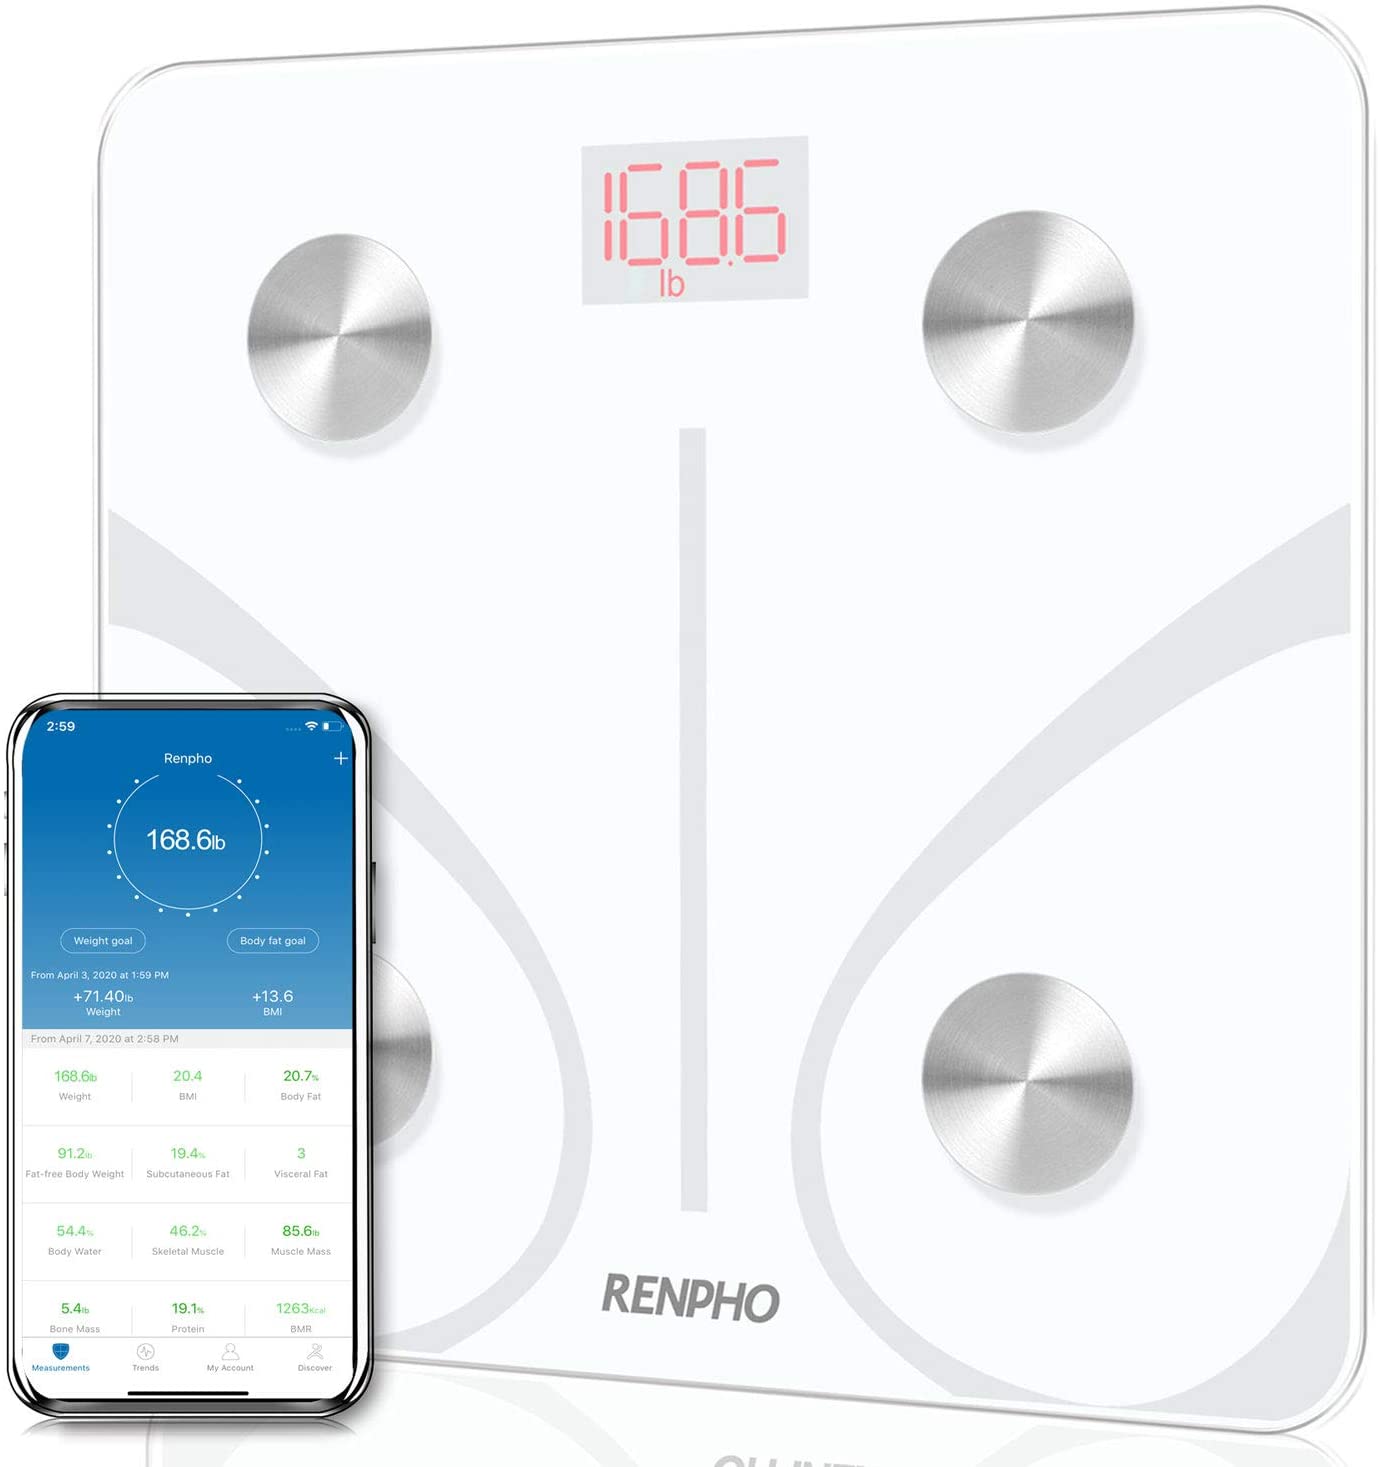 RENPHO Smart Scale for Body Weight, Digital Bathroom Scale BMI Weighing  Bluetooth Body Fat Scale, Body Composition Monitor Health Analyzer with